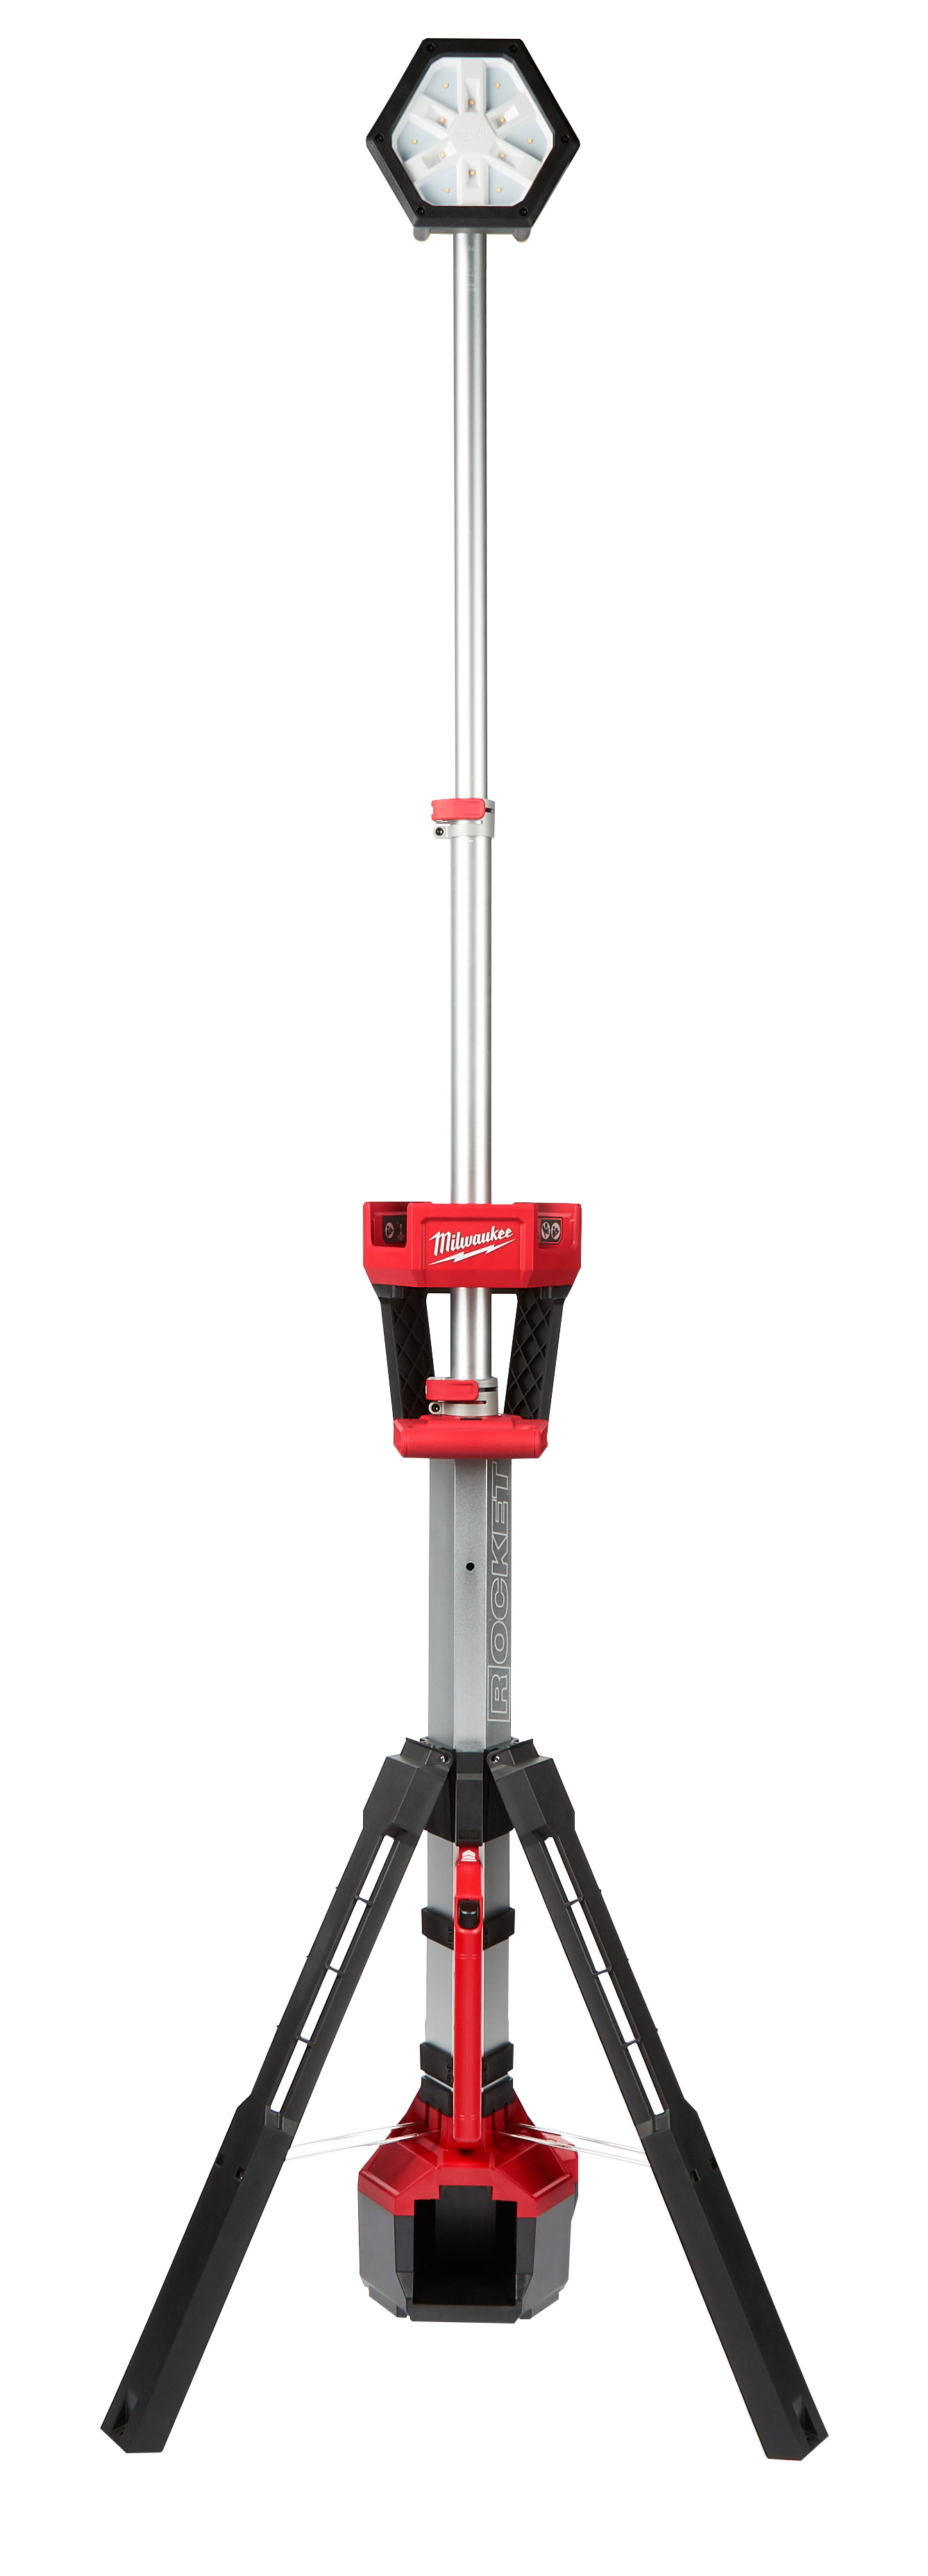 25% More light, all day operation. The M18™ ROCKET™ dual power tower light is providing more light on the job with 2500 lm of TRUEVIEW™ hight definition output. All while having the capability being dual power, powered by M18™ or extension cord. The light head can be extended from 4 to 7 Ft. to light overhead work or minimize shadows when casting light downward. Capable of filling large areas with light, it provides 2,500 lm in its high mode, 1,100 in. medium and 700 in. low, and it can run for up to 4, 8, or 12 hours with an M18™ REDLITHIUM™ XC 5.0 battery pack. It uses TRUEVIEW™ high definition output providing neutral white color and a high color rendering index paired with a Milwaukee® designed reflector to produce an even beam pattern. Its reinforced legs are impact resistant, and its low center of gravity provides a stable base. The light head is protected by an impact-resistant lens and bezel, and it nests into a protective shroud for secure transport and storage. Its LEDS never need to be replaced, and are backed by a Limited Lifetime Warranty. The combination of these technologies offers professionals the highest quality LED lighting solution, on or off the jobsite.